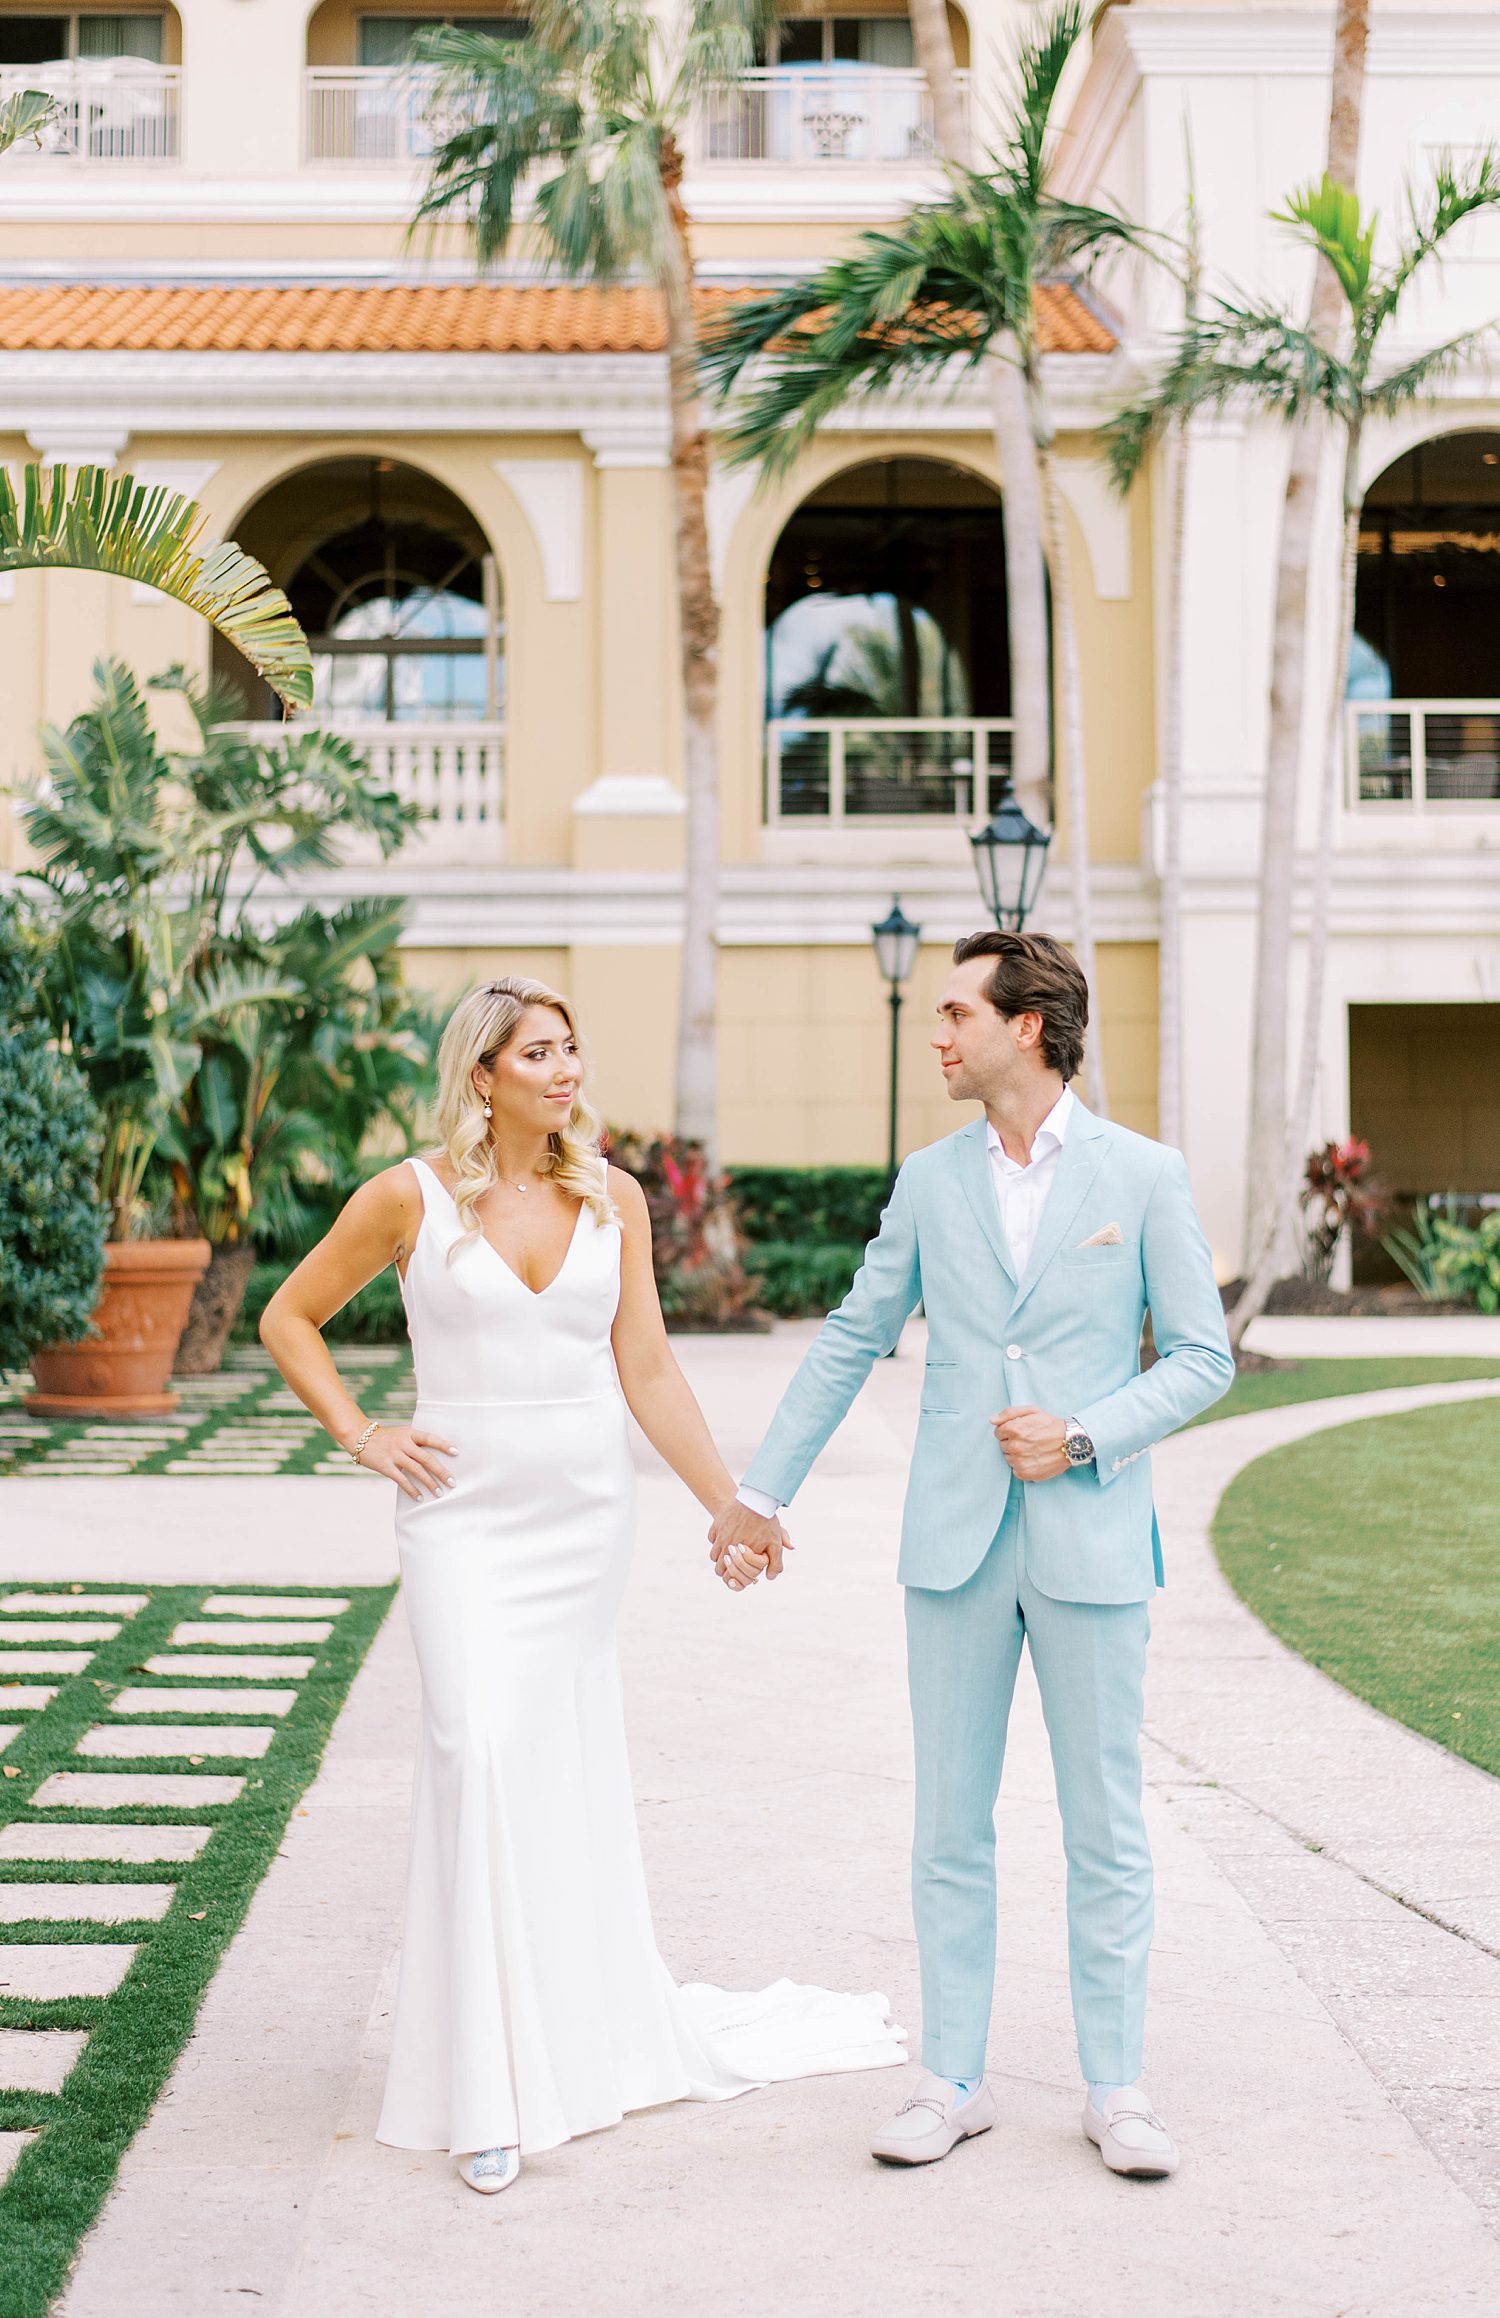 high fashion wedding day at Ritz Carlton Sarasota with bride in custom gown and groom in blue tux